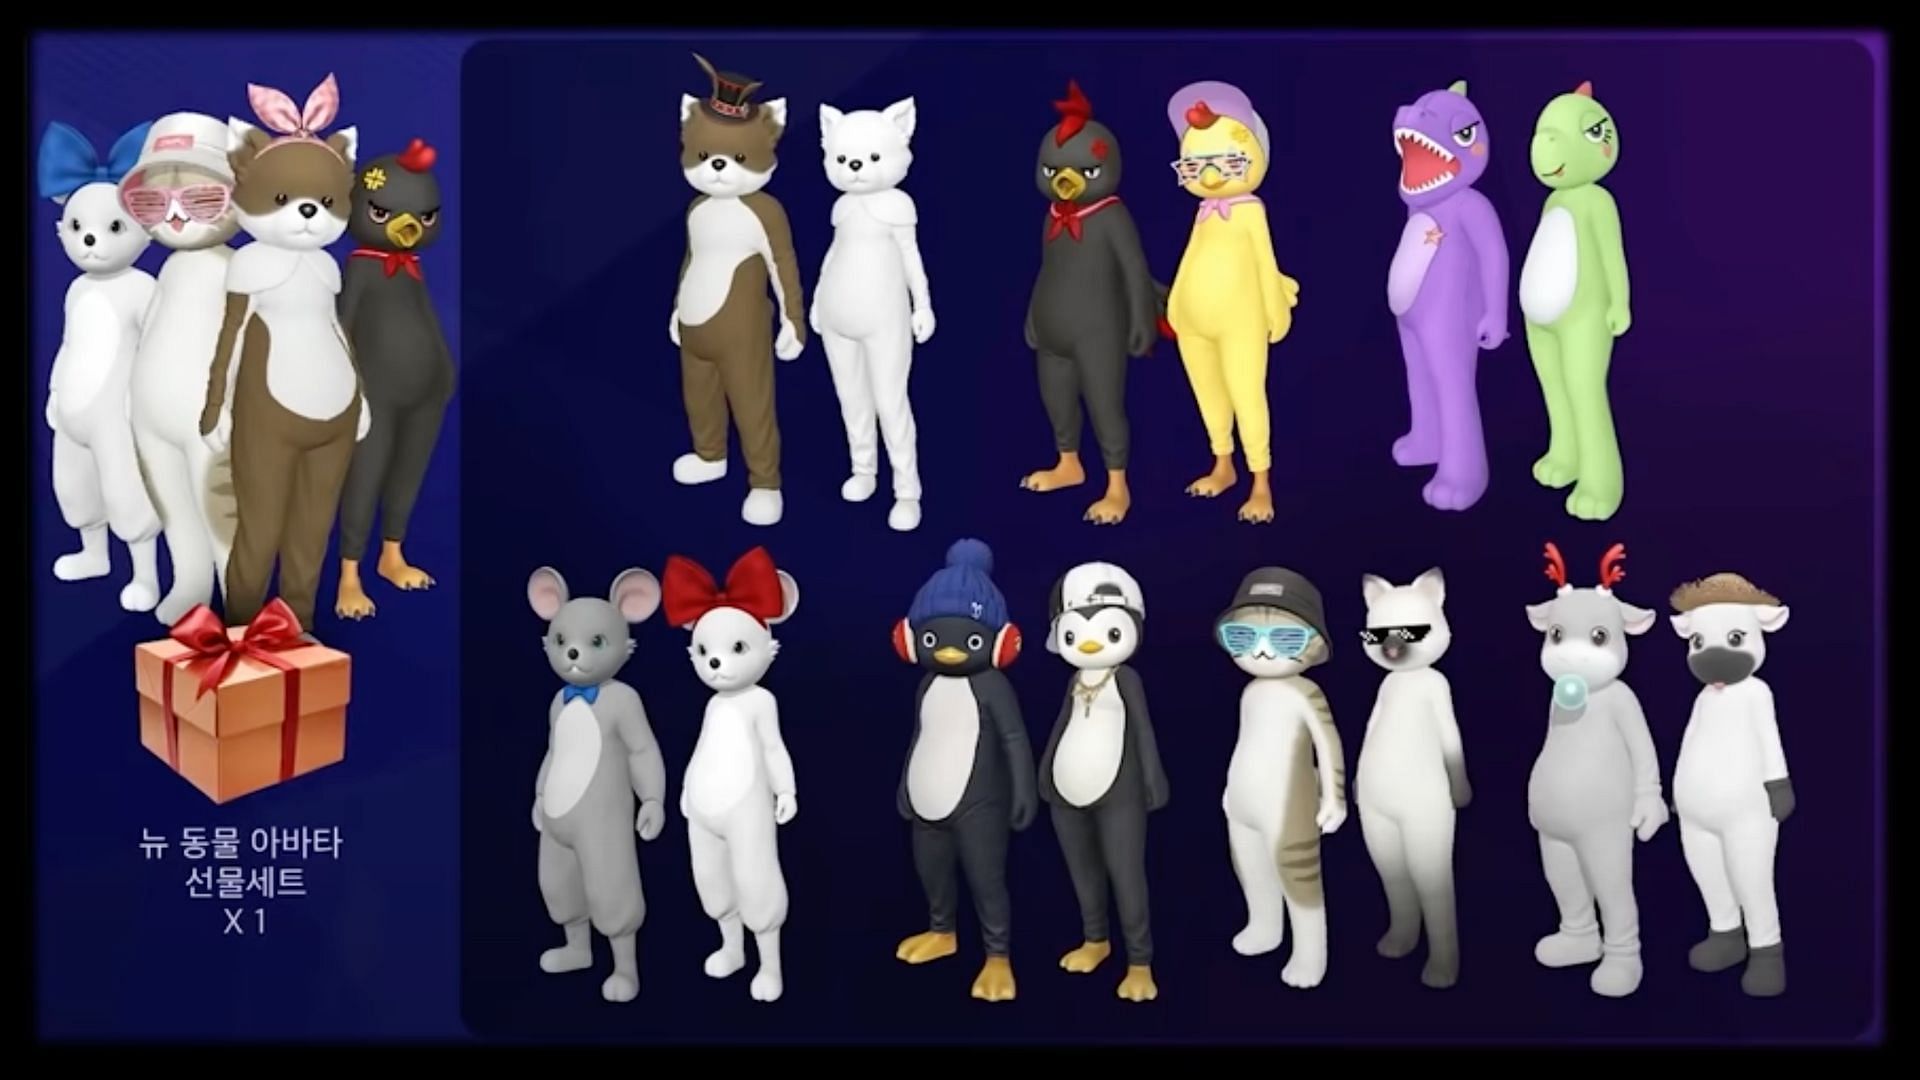 Players are able to choose from a lot of different cute skins that they can get for free in the Gratitude Gift (Image via Attingplay/YouTube)